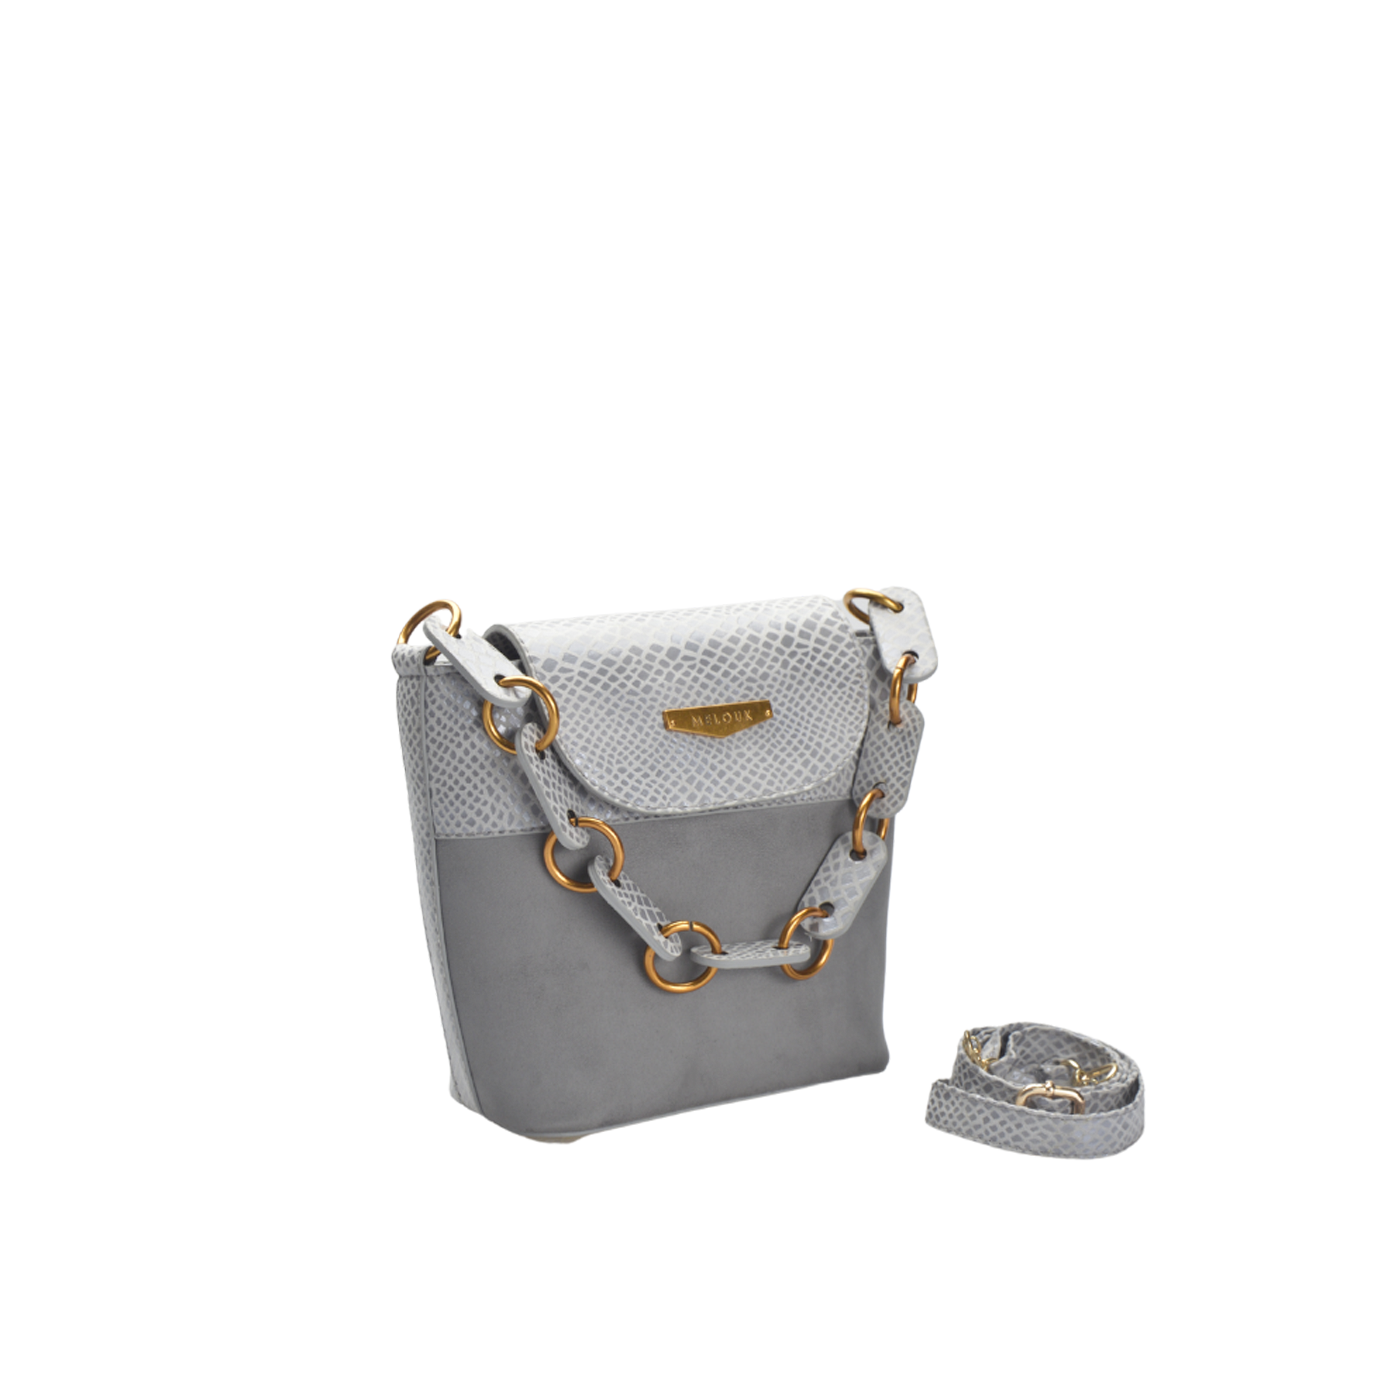 Gray Embossed Leather Shoulder Bag With Buckle